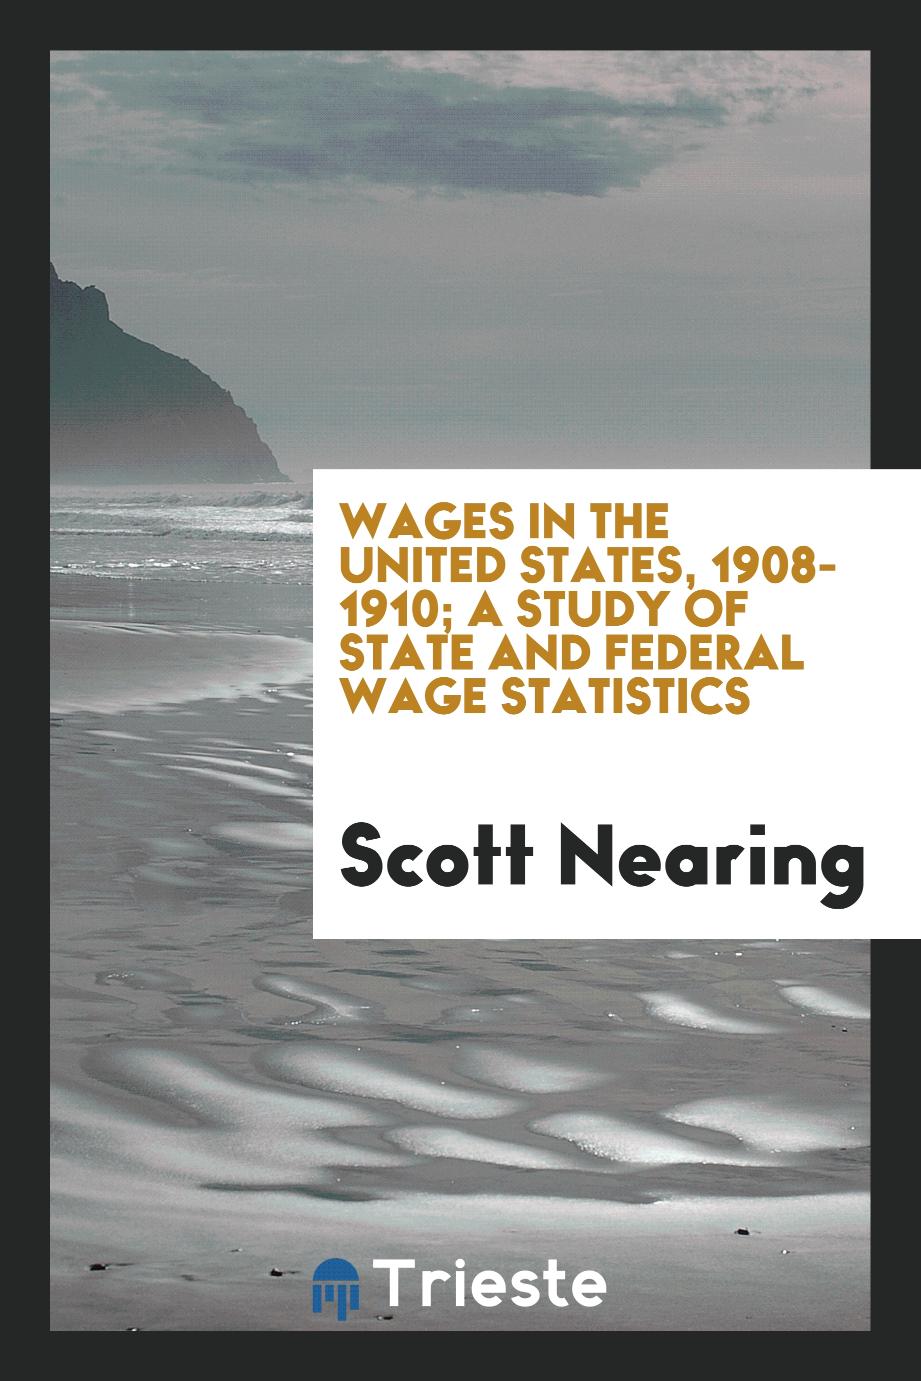 Wages in the United States, 1908-1910; a study of state and federal wage statistics